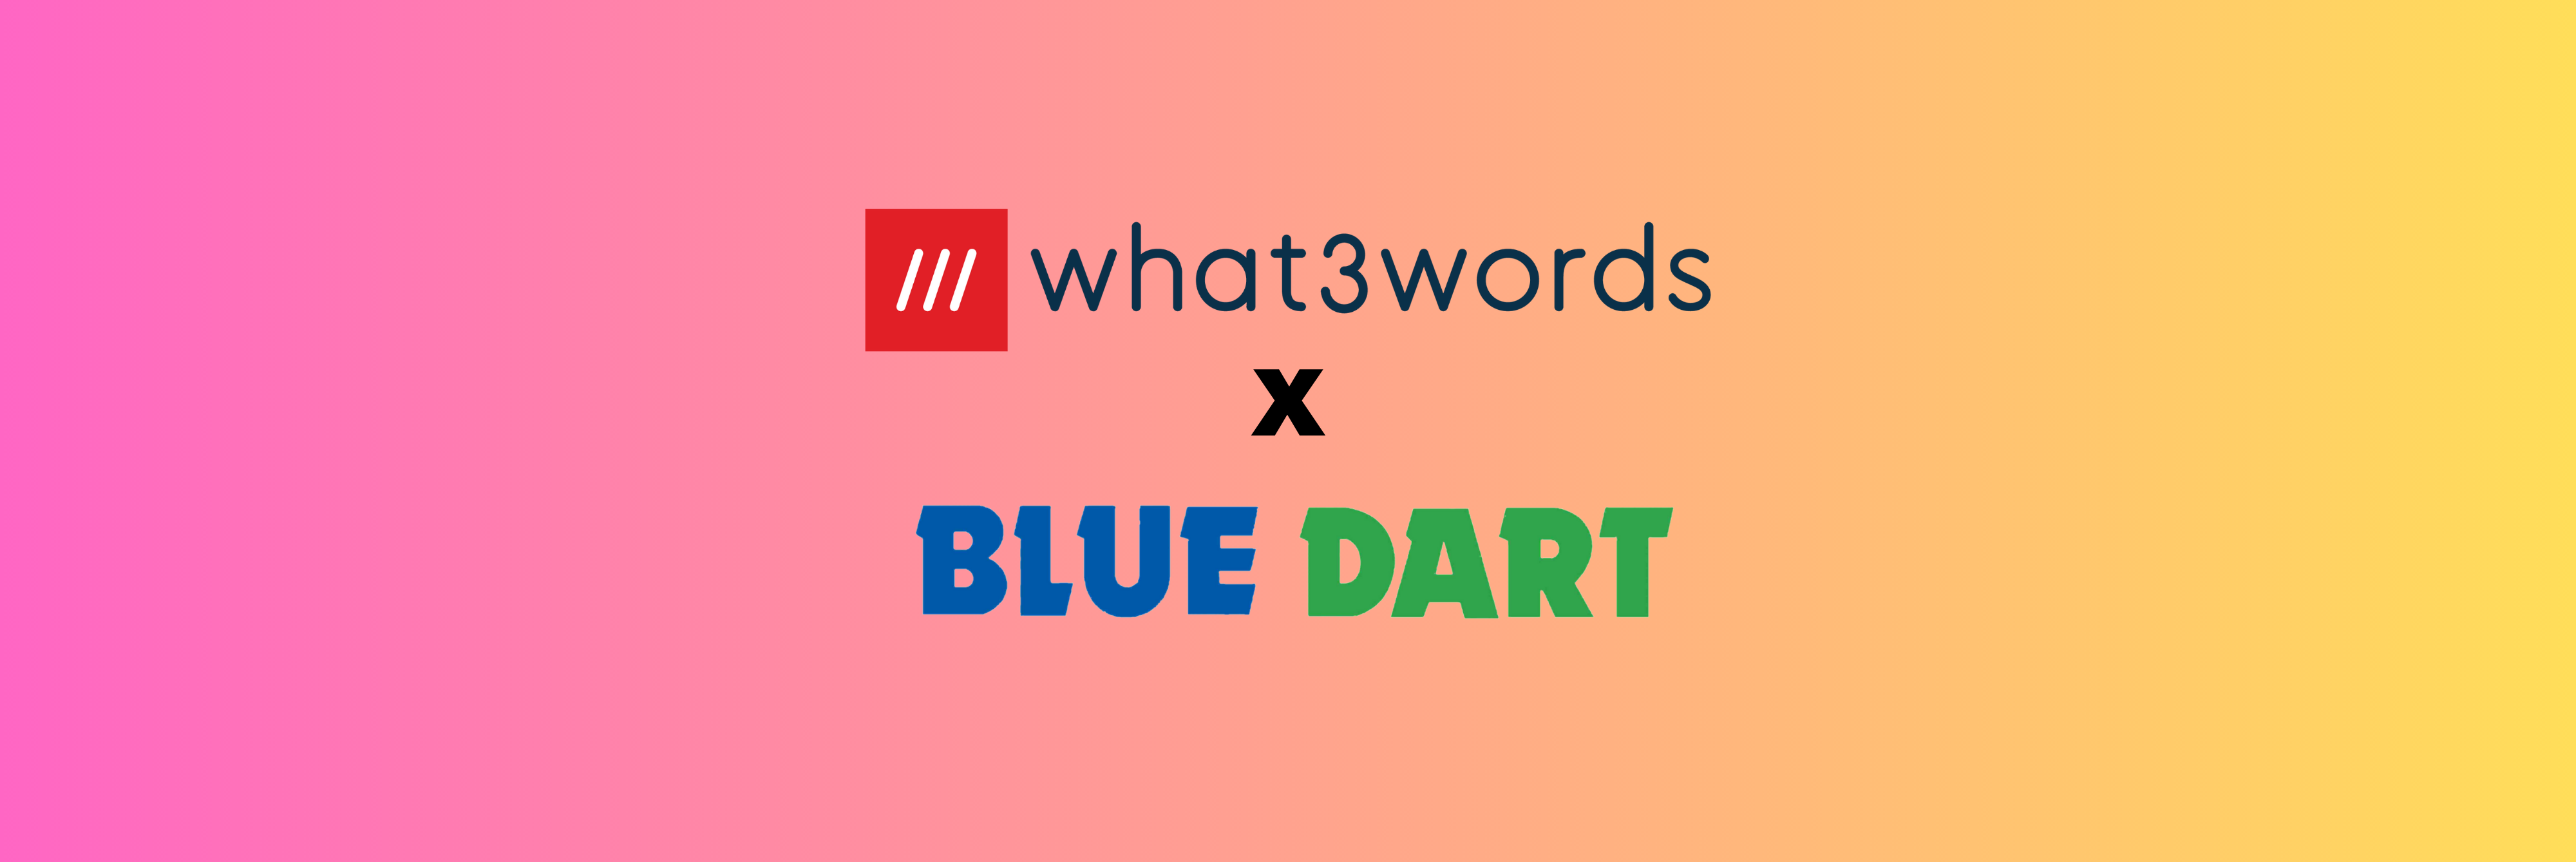 Digitalising deliveries across Bharat: Customers can now use what3words across all Blue Dart Platforms